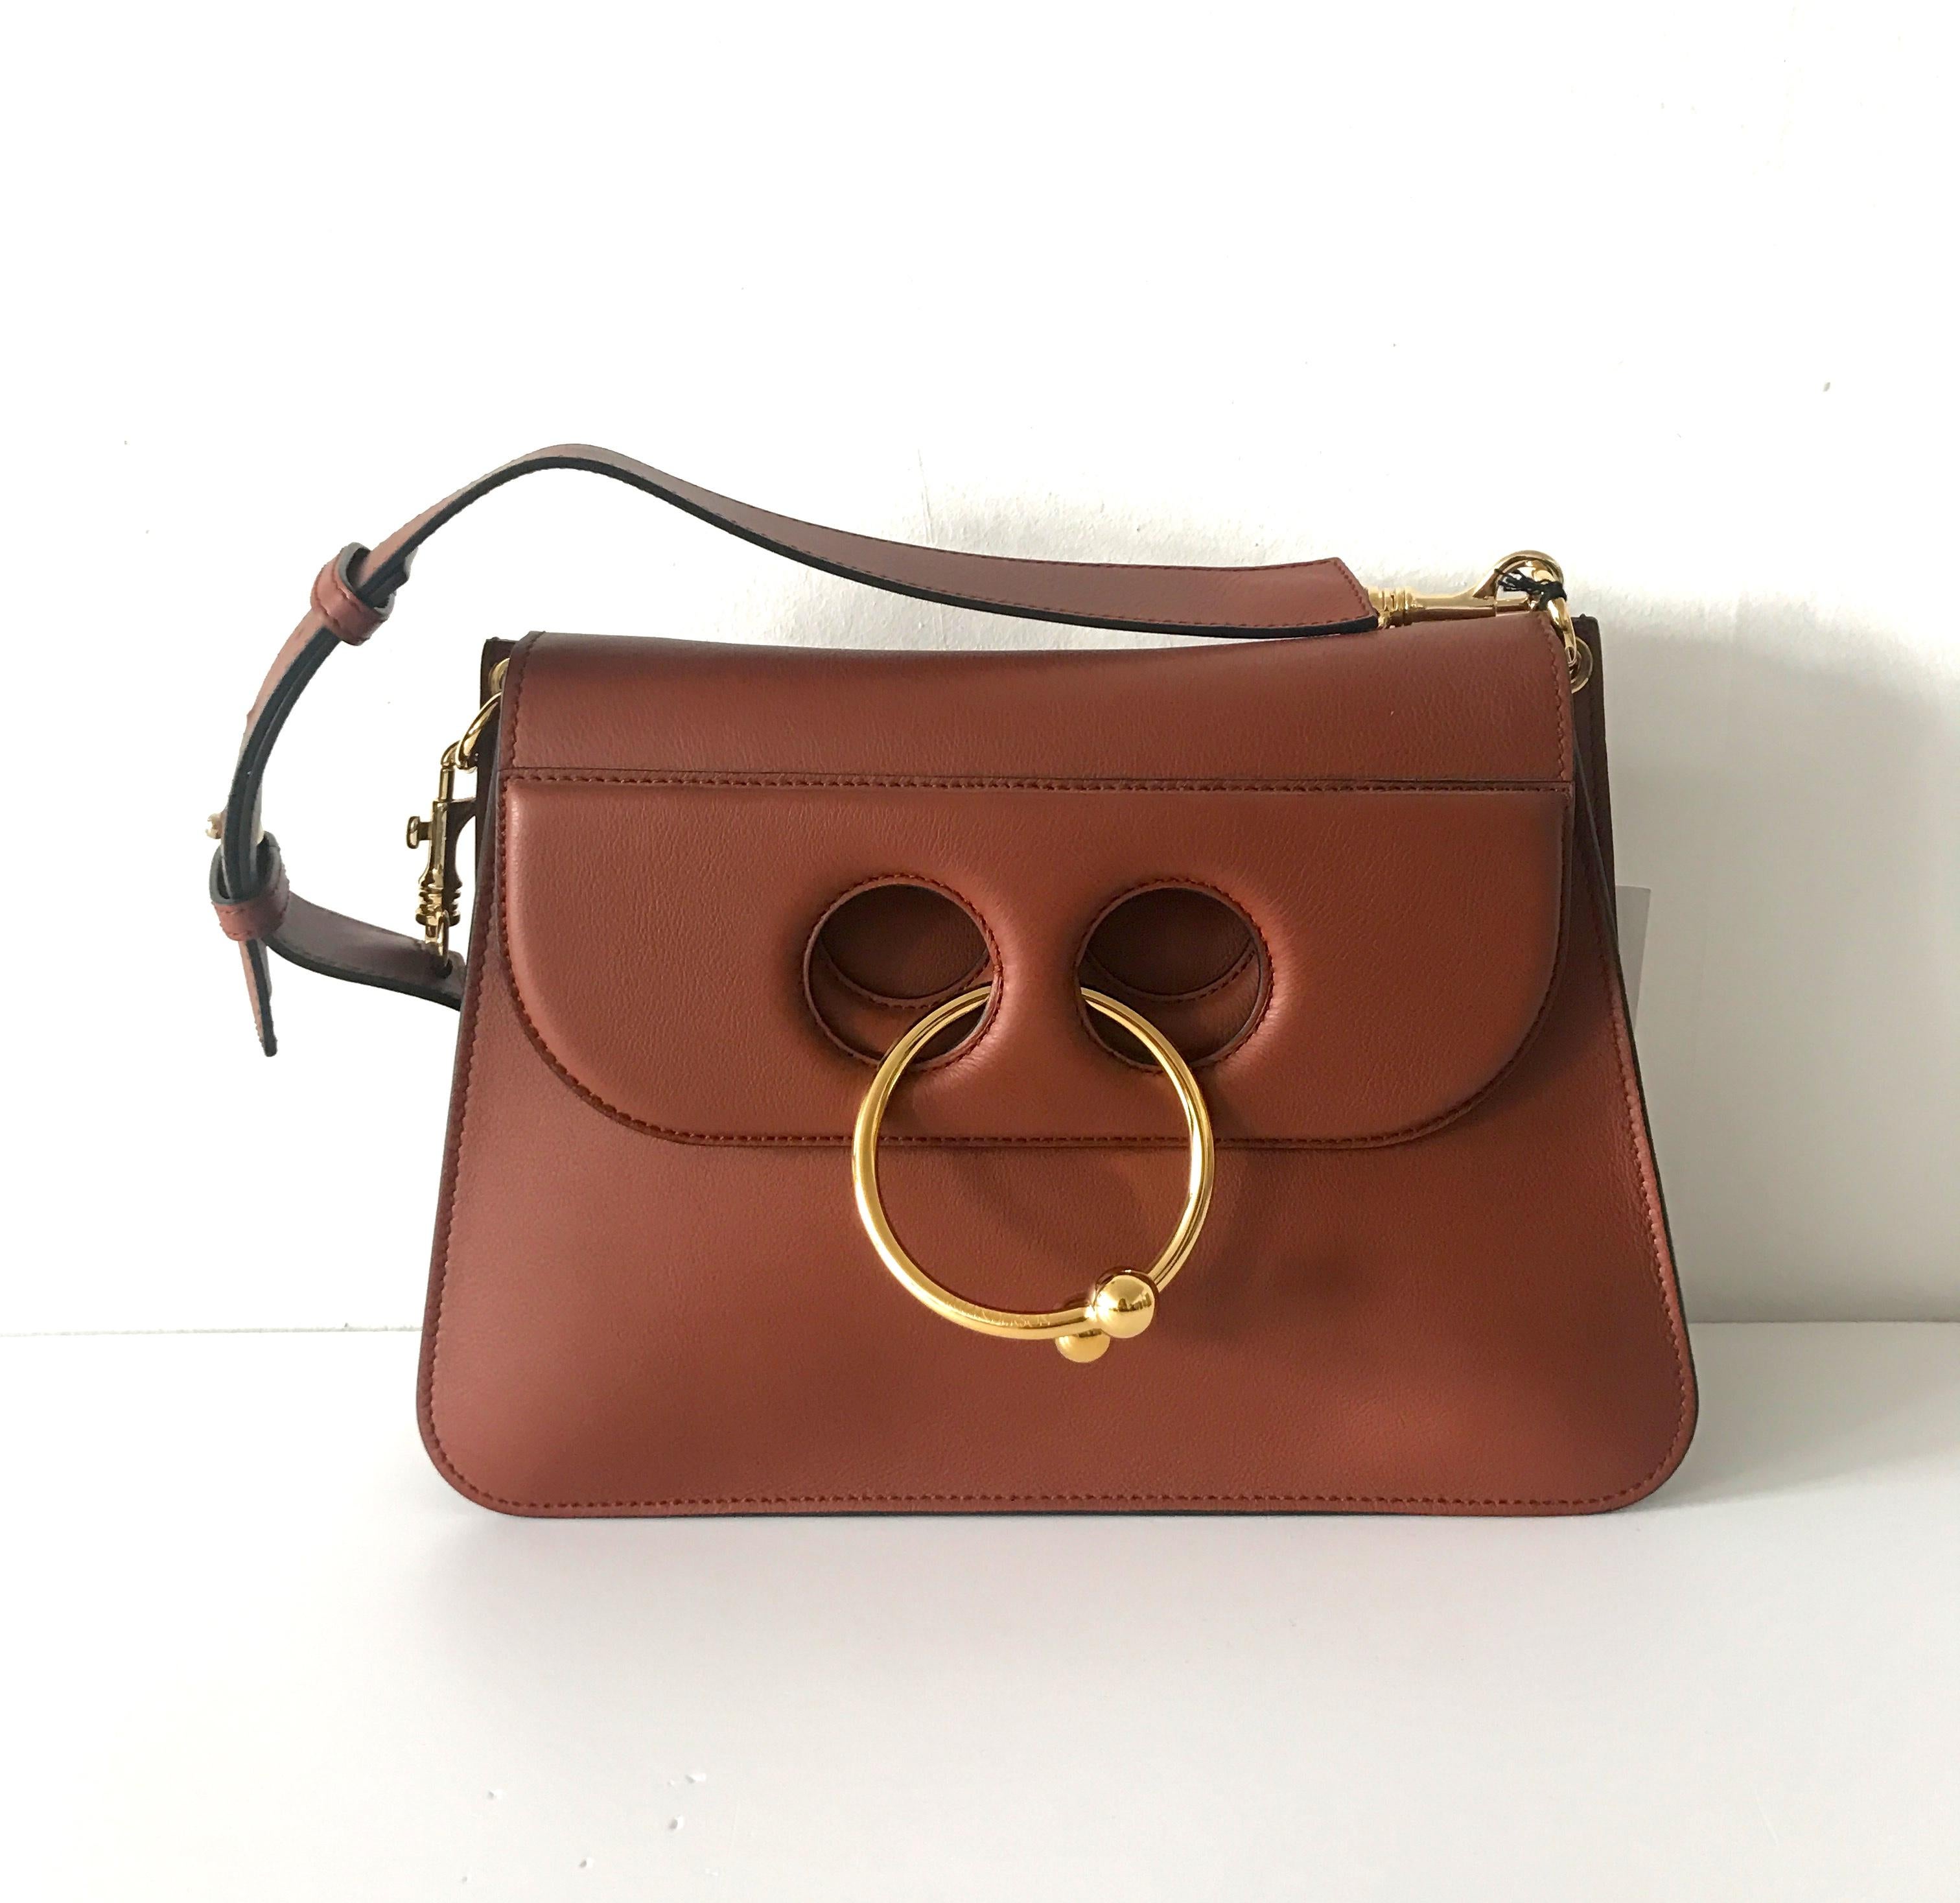 J.W.Anderson's Pierce medium shoulder bag is crafted of brown supple calf leather. Designed to resemble a septum piercing, this playful style is embellished with a goldtone metal double-ball ring that 